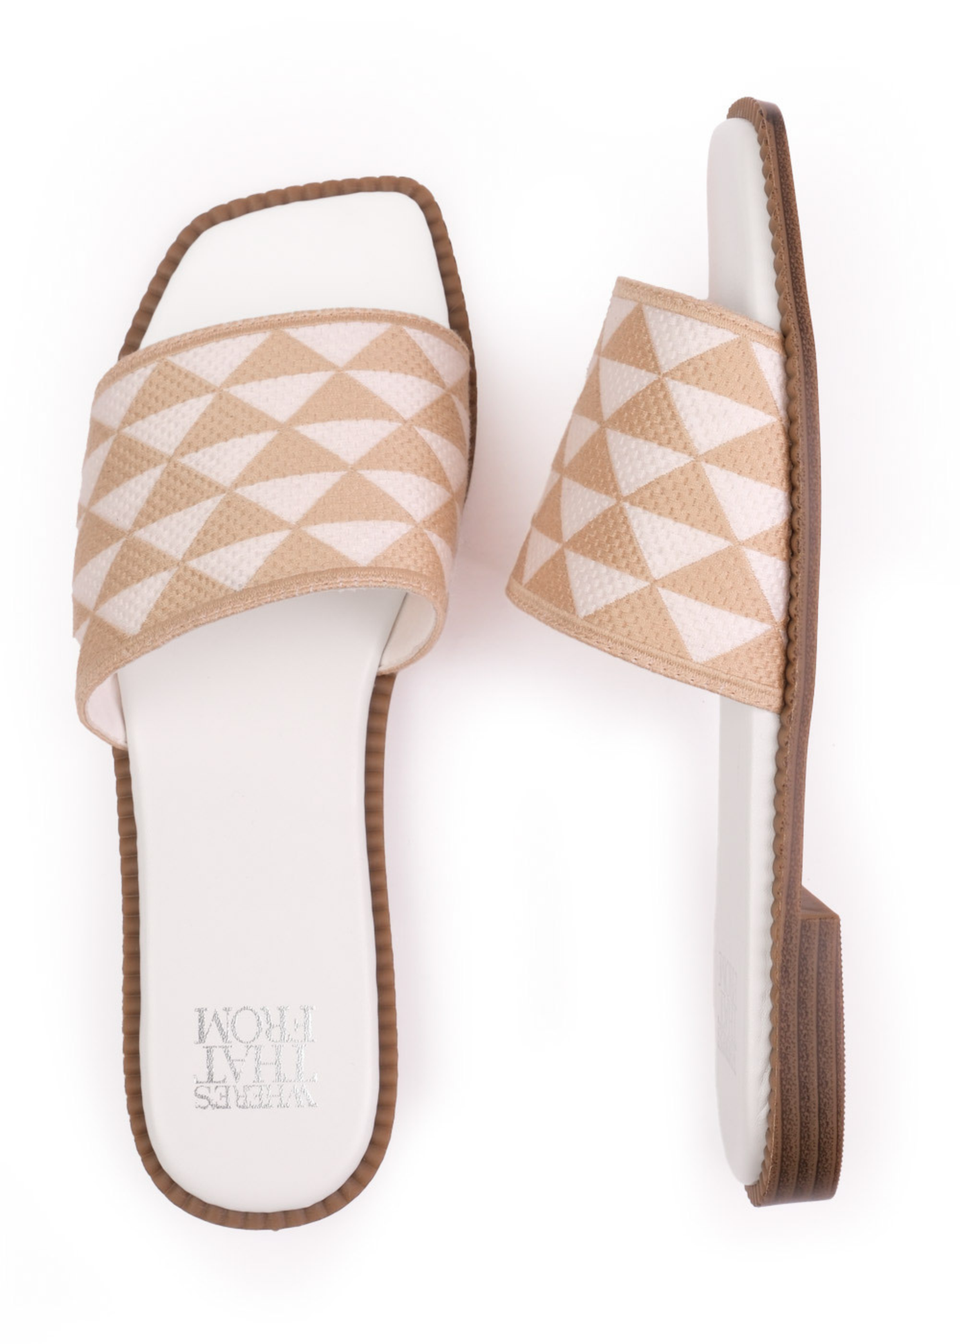 Where's That From Cream Pu Sycamore Flat Sandals